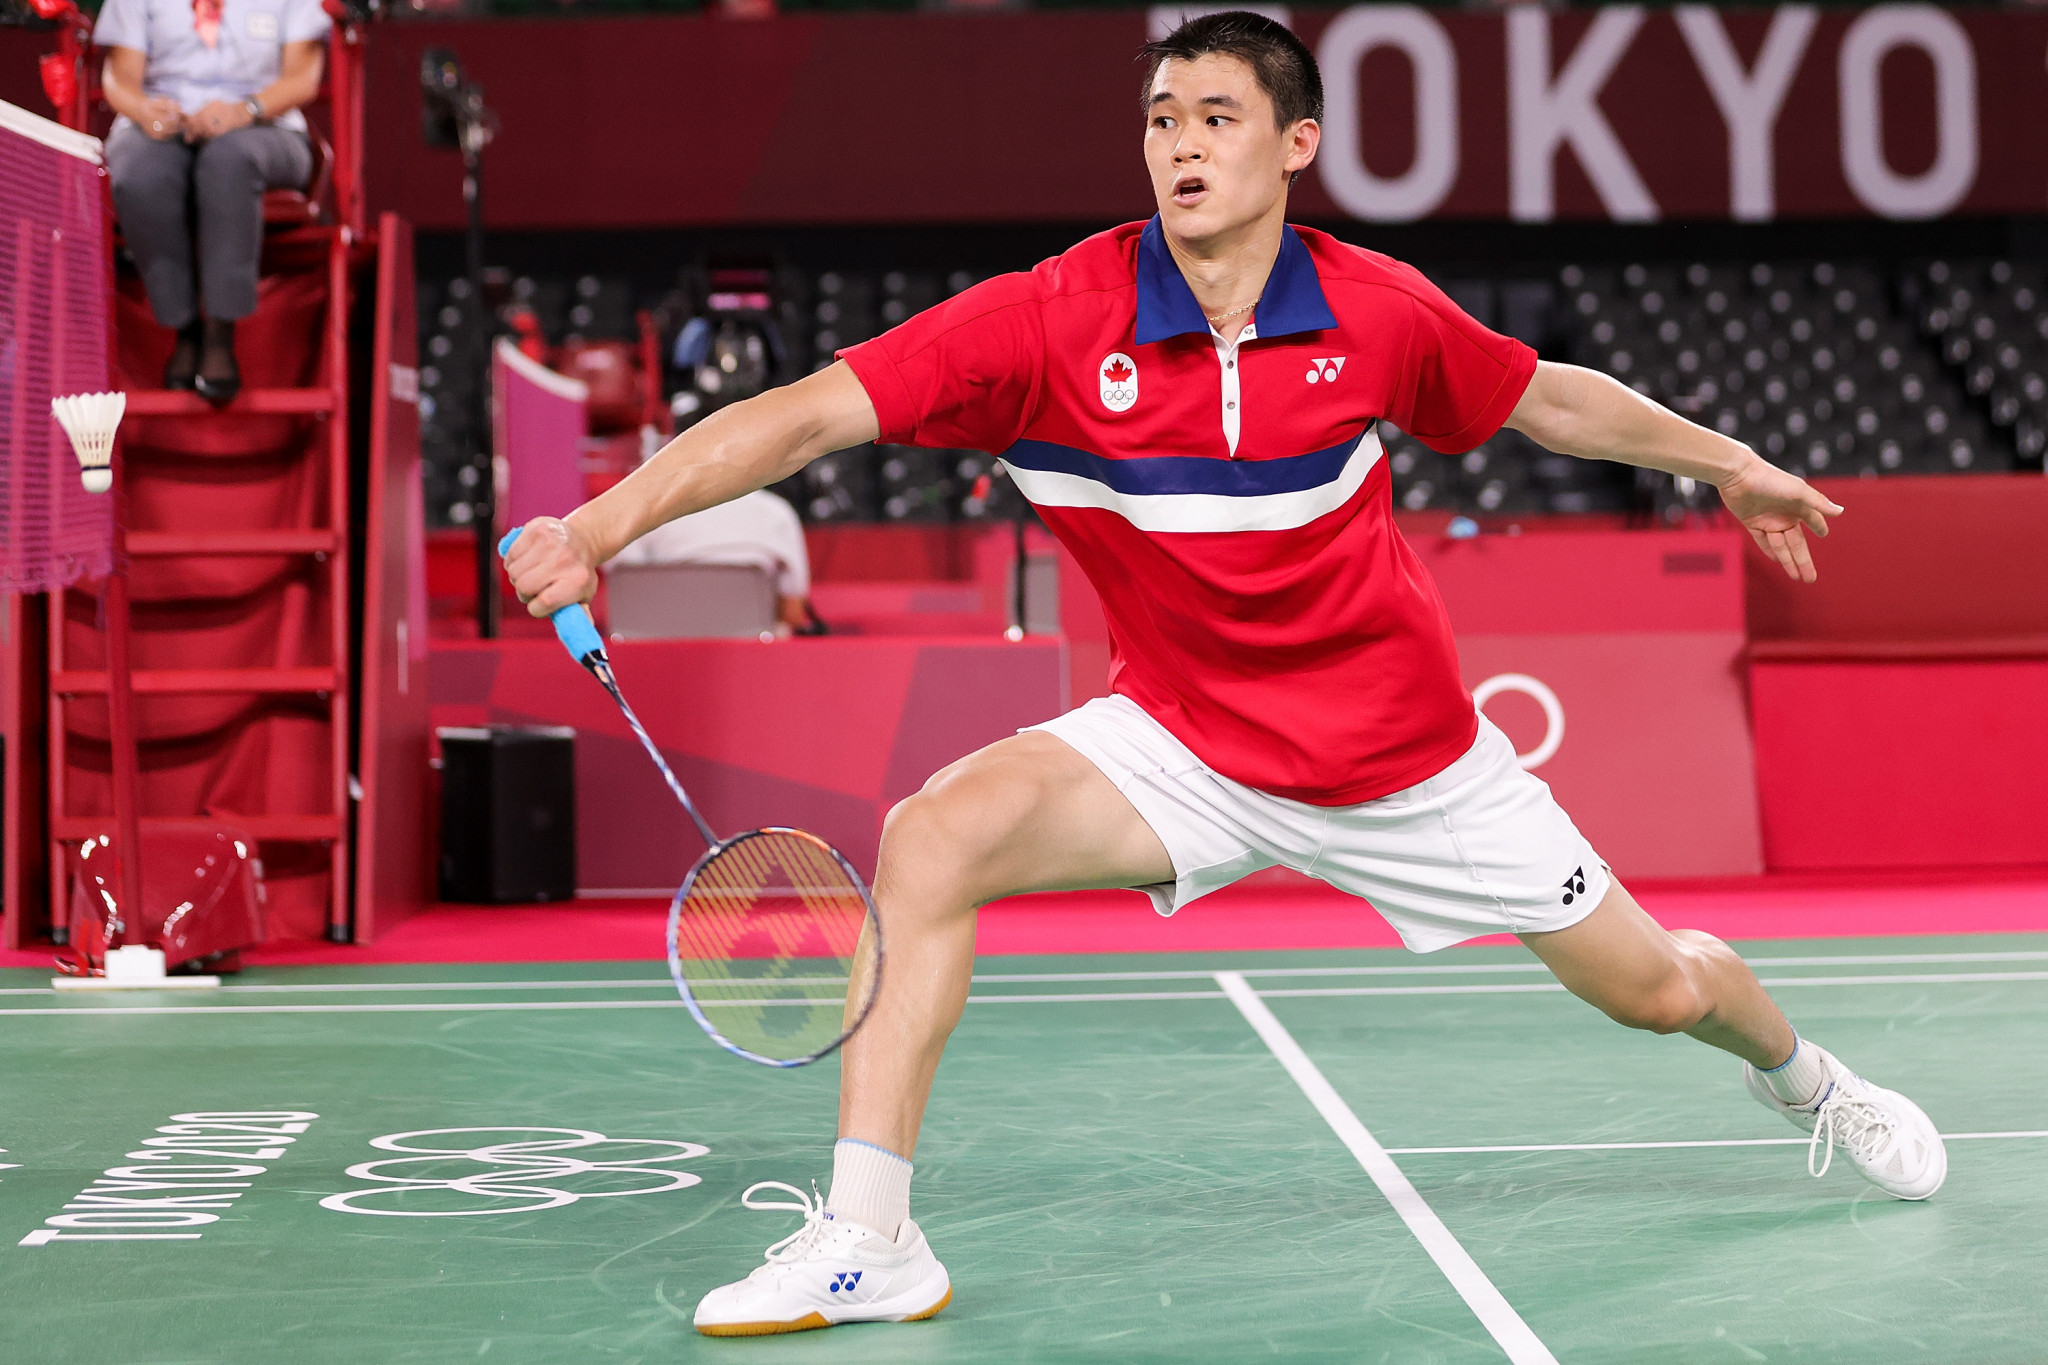 Canada's Brian Yang is set to face Mexico's Armando Gaitan in the men's singles second round at the Pan Am Individual Badminton Championships ©Getty Images